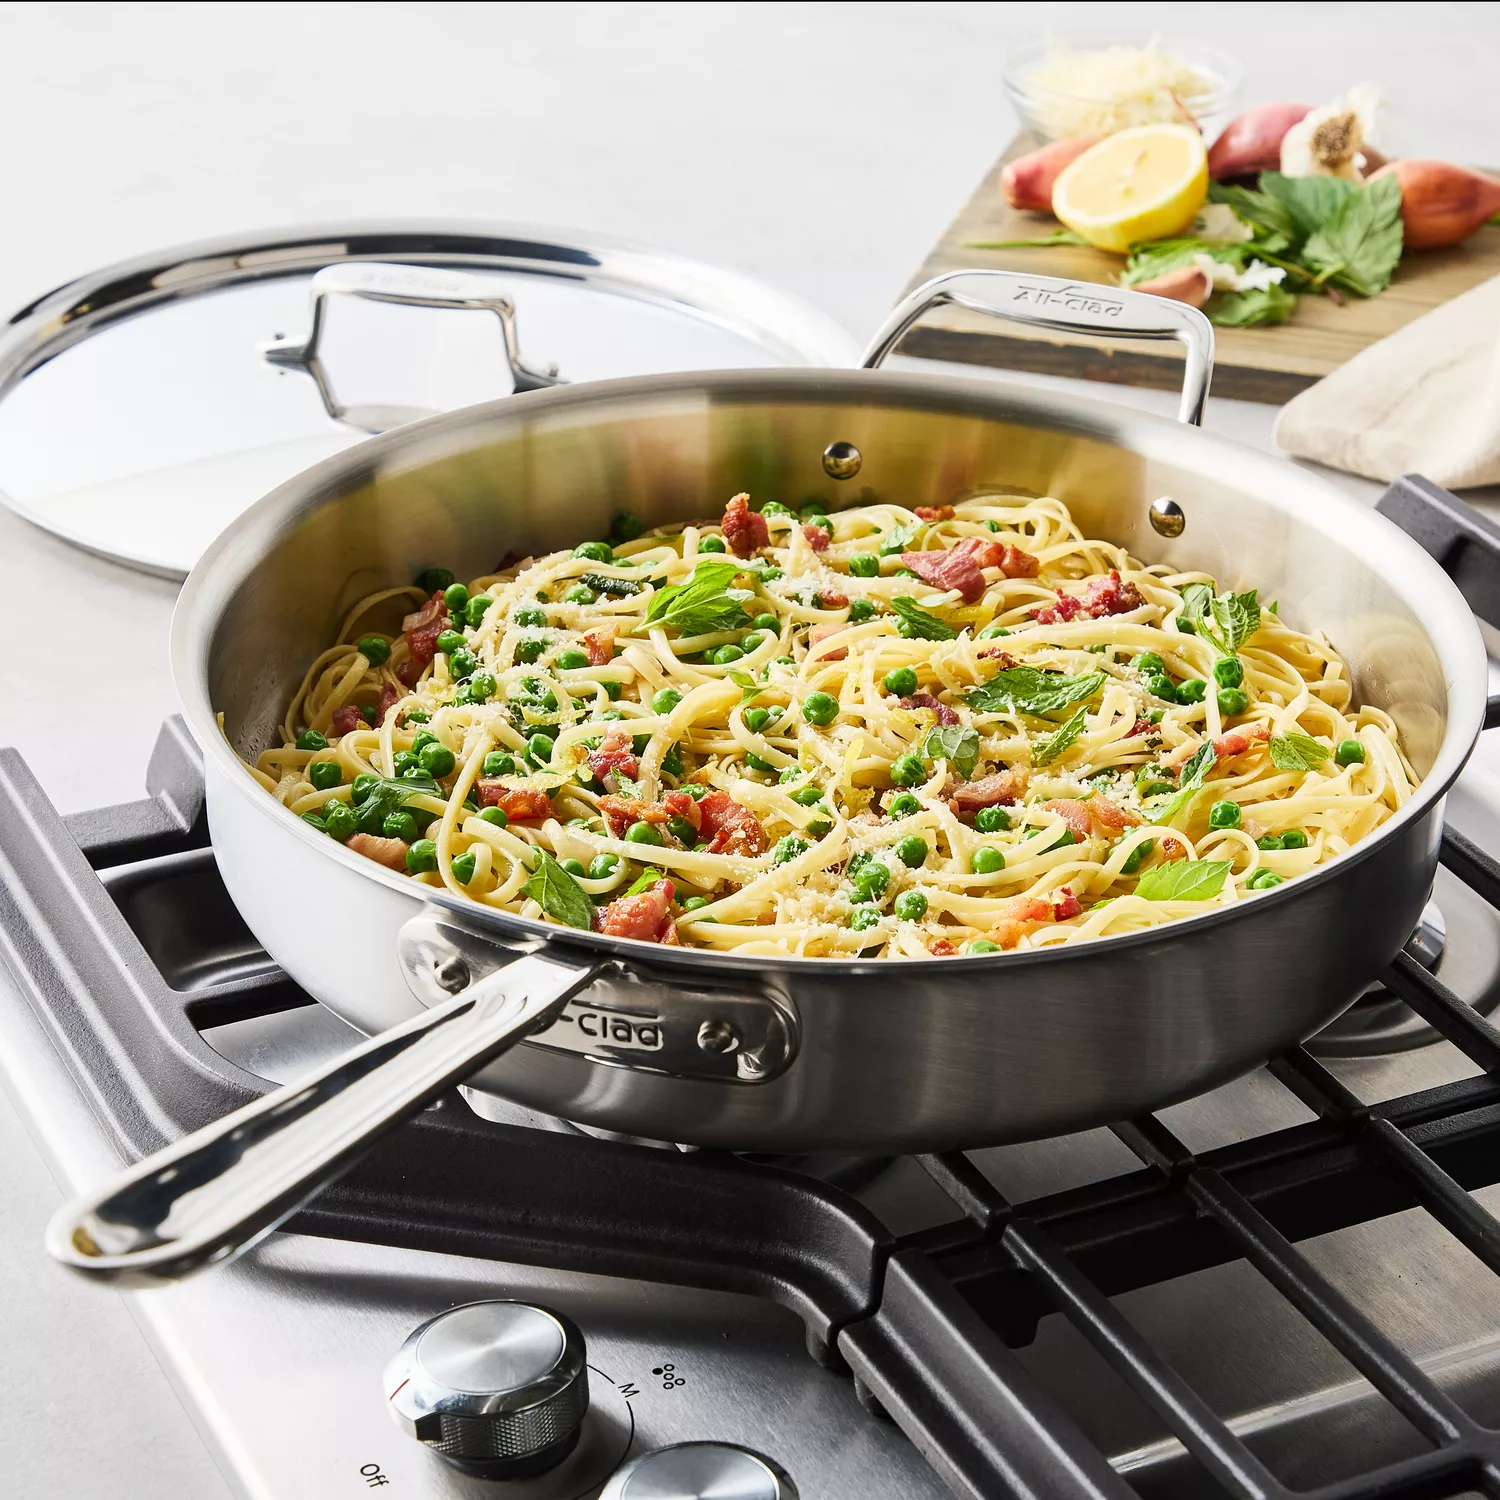 All-Clad D5 Brushed Stainless Steel Saut&#233; Pan